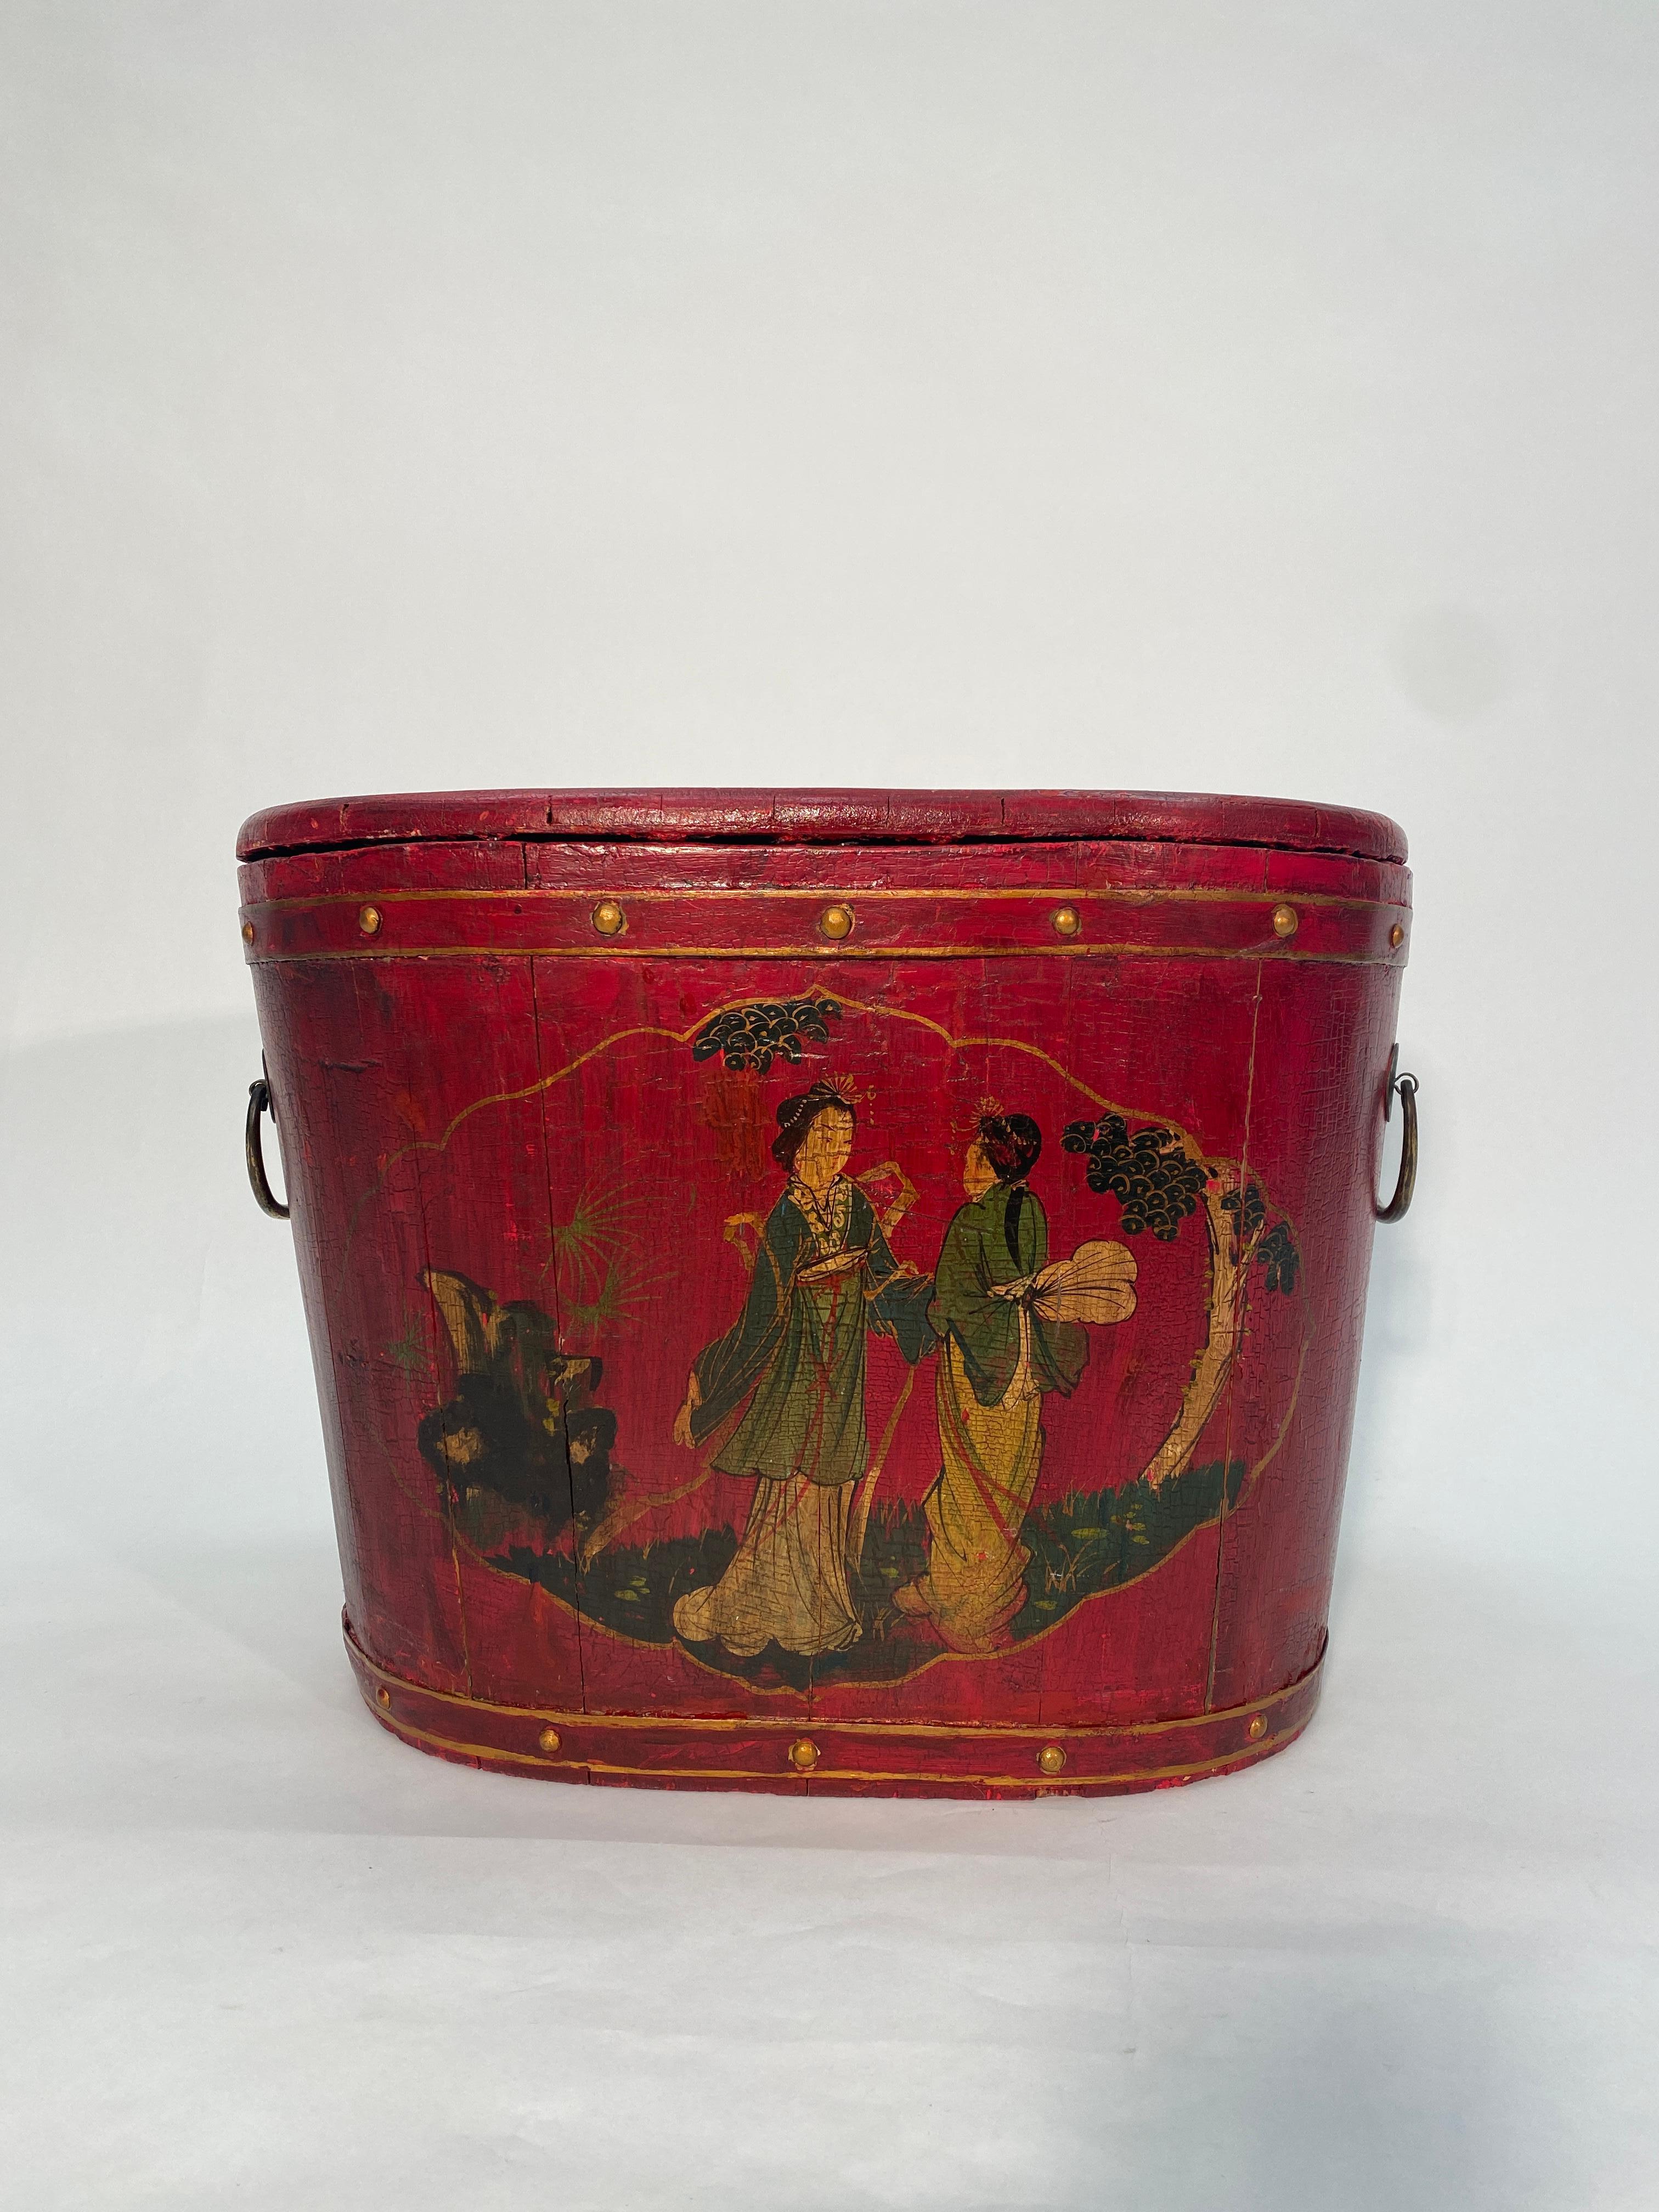 Gorgeous Chinoiserie hand painted rice pail with lid. Great decorative accent item. 

Measures: 19